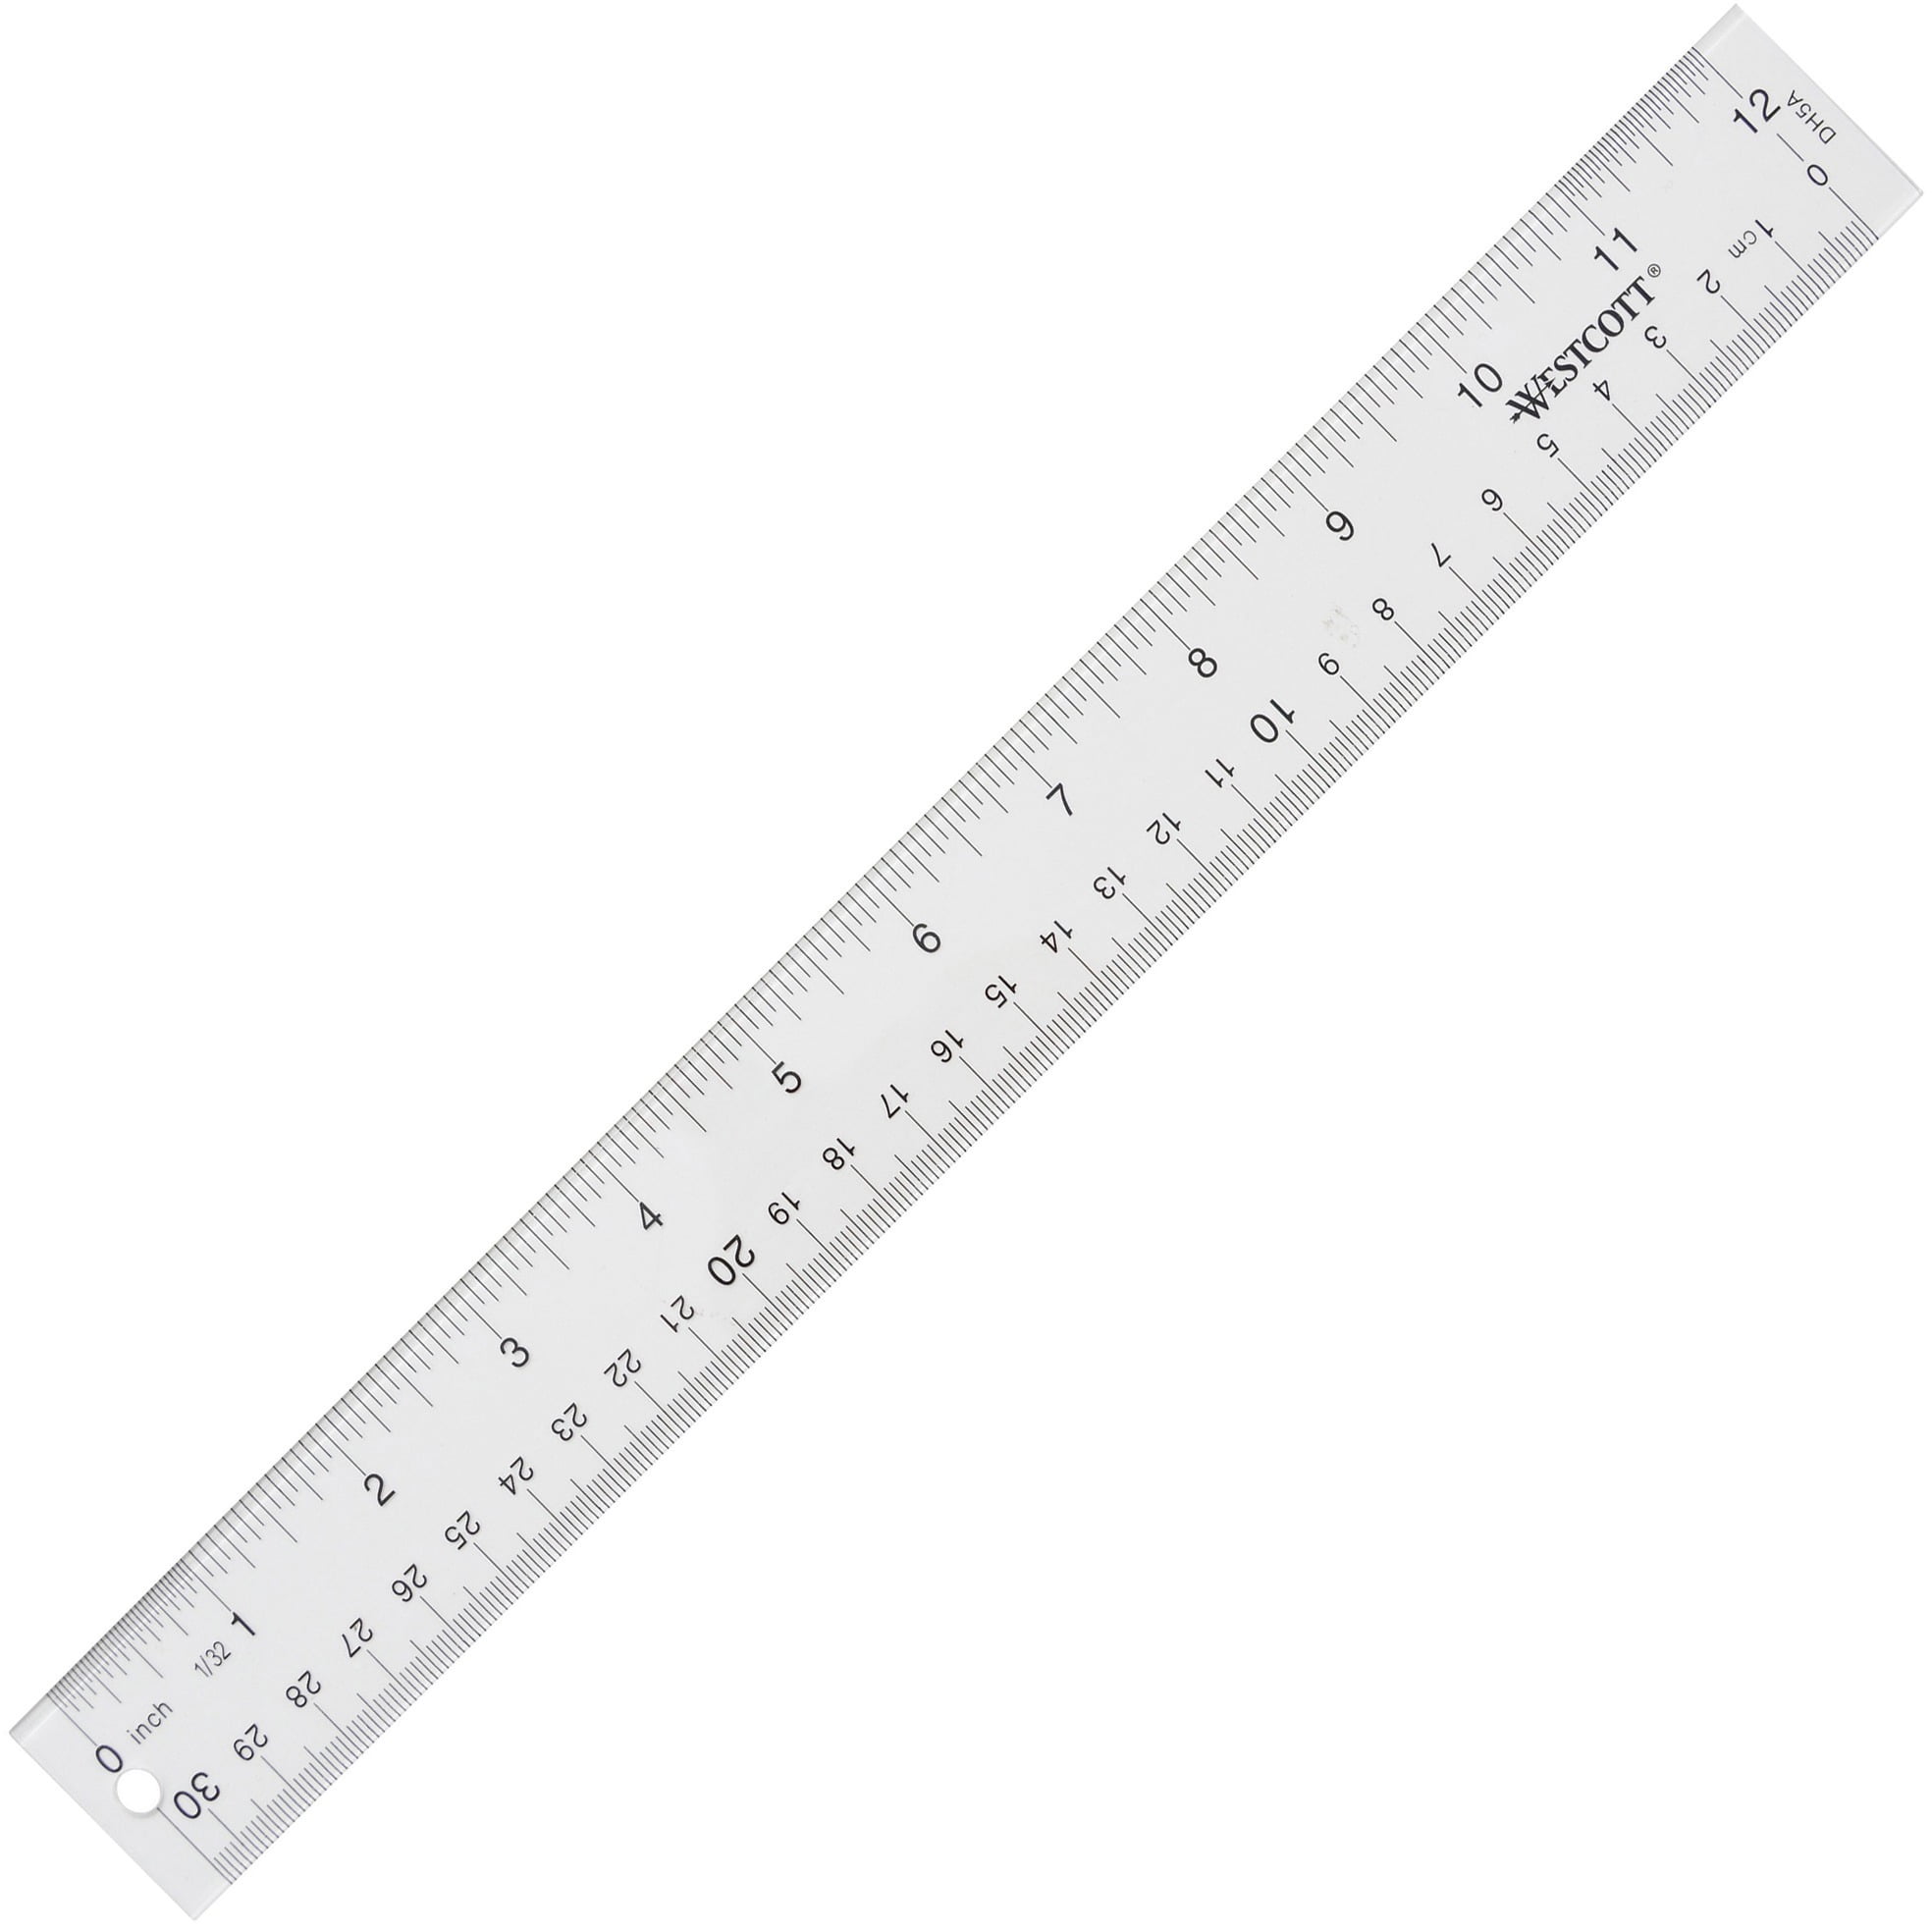 Supplies 4 Plastic Rulers, Bulk Shatterproof 12 Inch Ruler For School,  Home, Or Office, Clear Plastic Rulers, 4assorted Colors